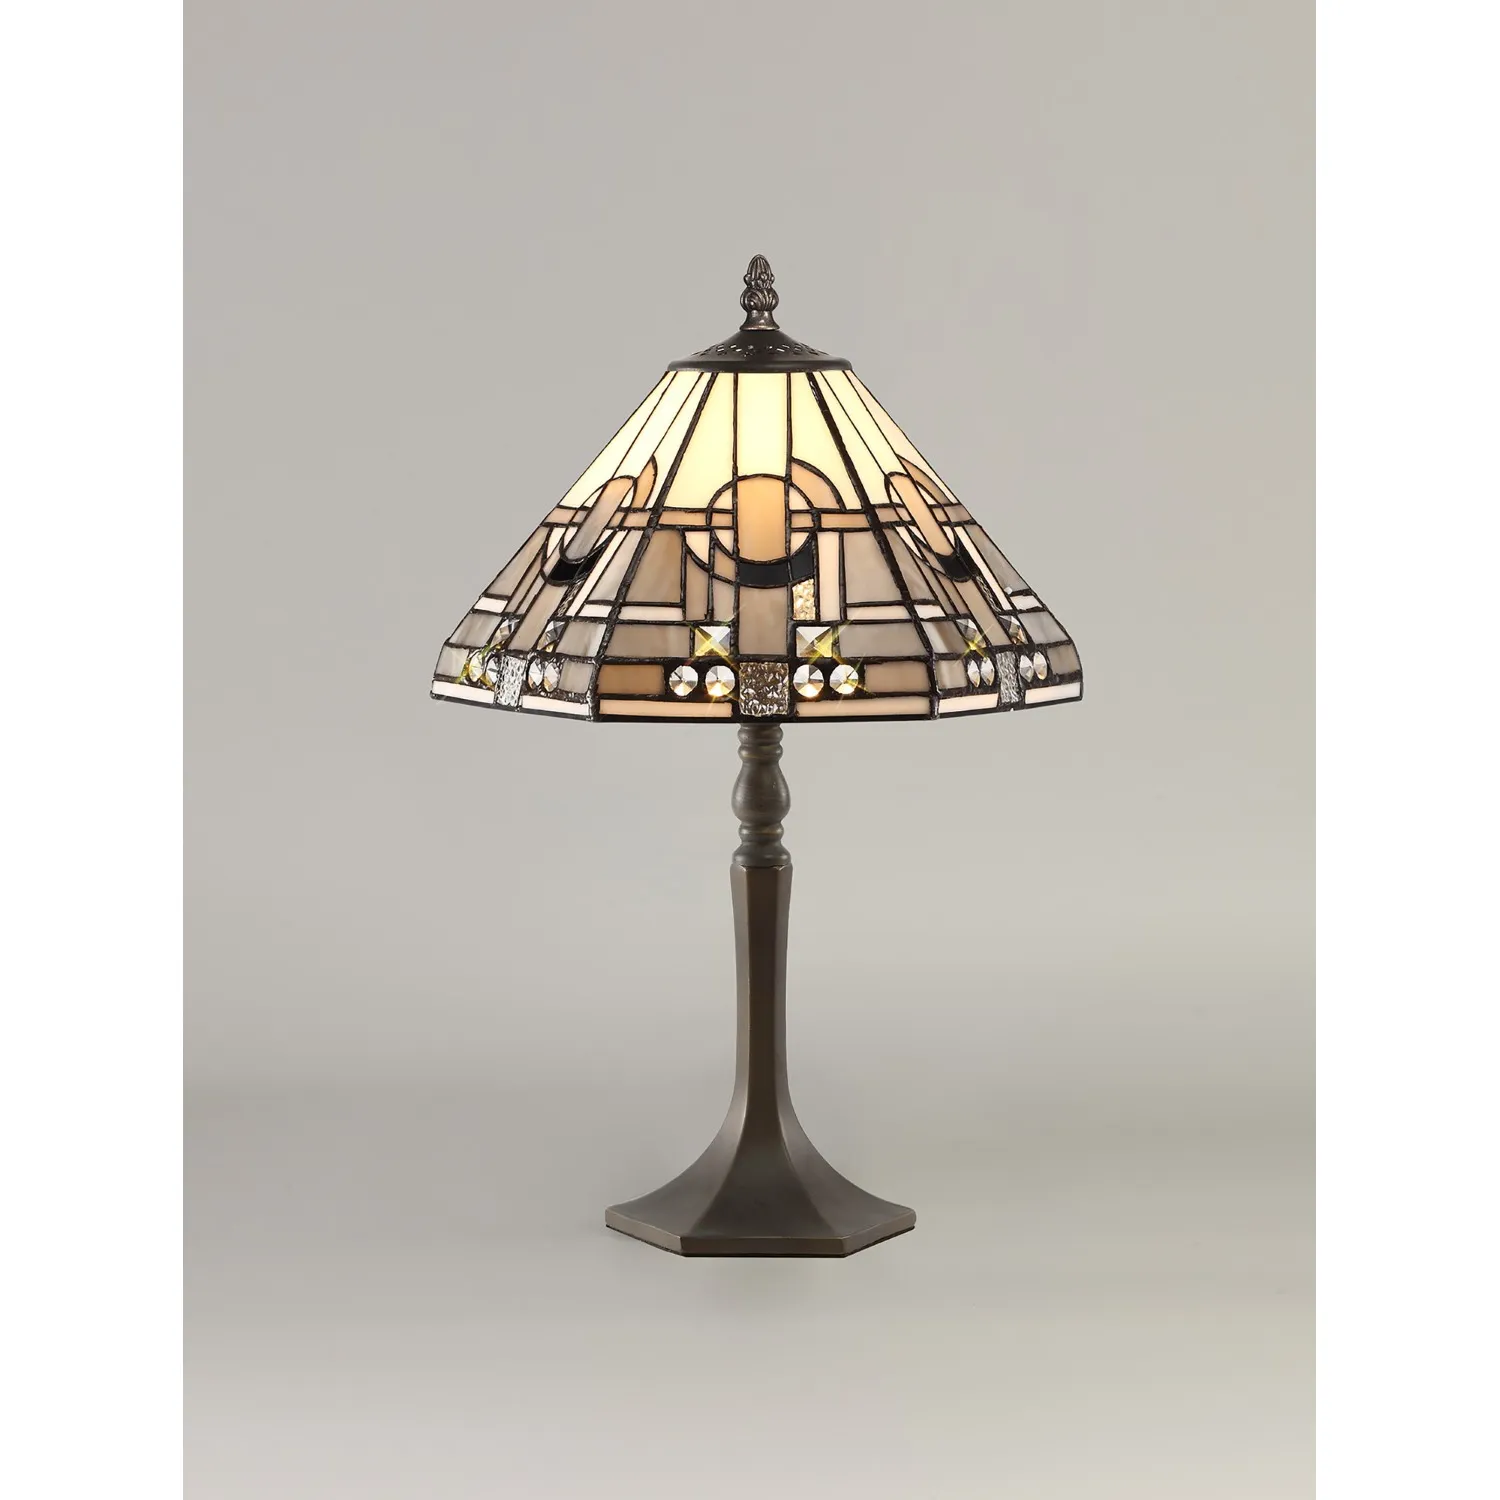 Knebworth 1 Light Octagonal Table Lamp E27 With 30cm Tiffany Shade, White Grey Black Clear Crystal Aged Antique Brass